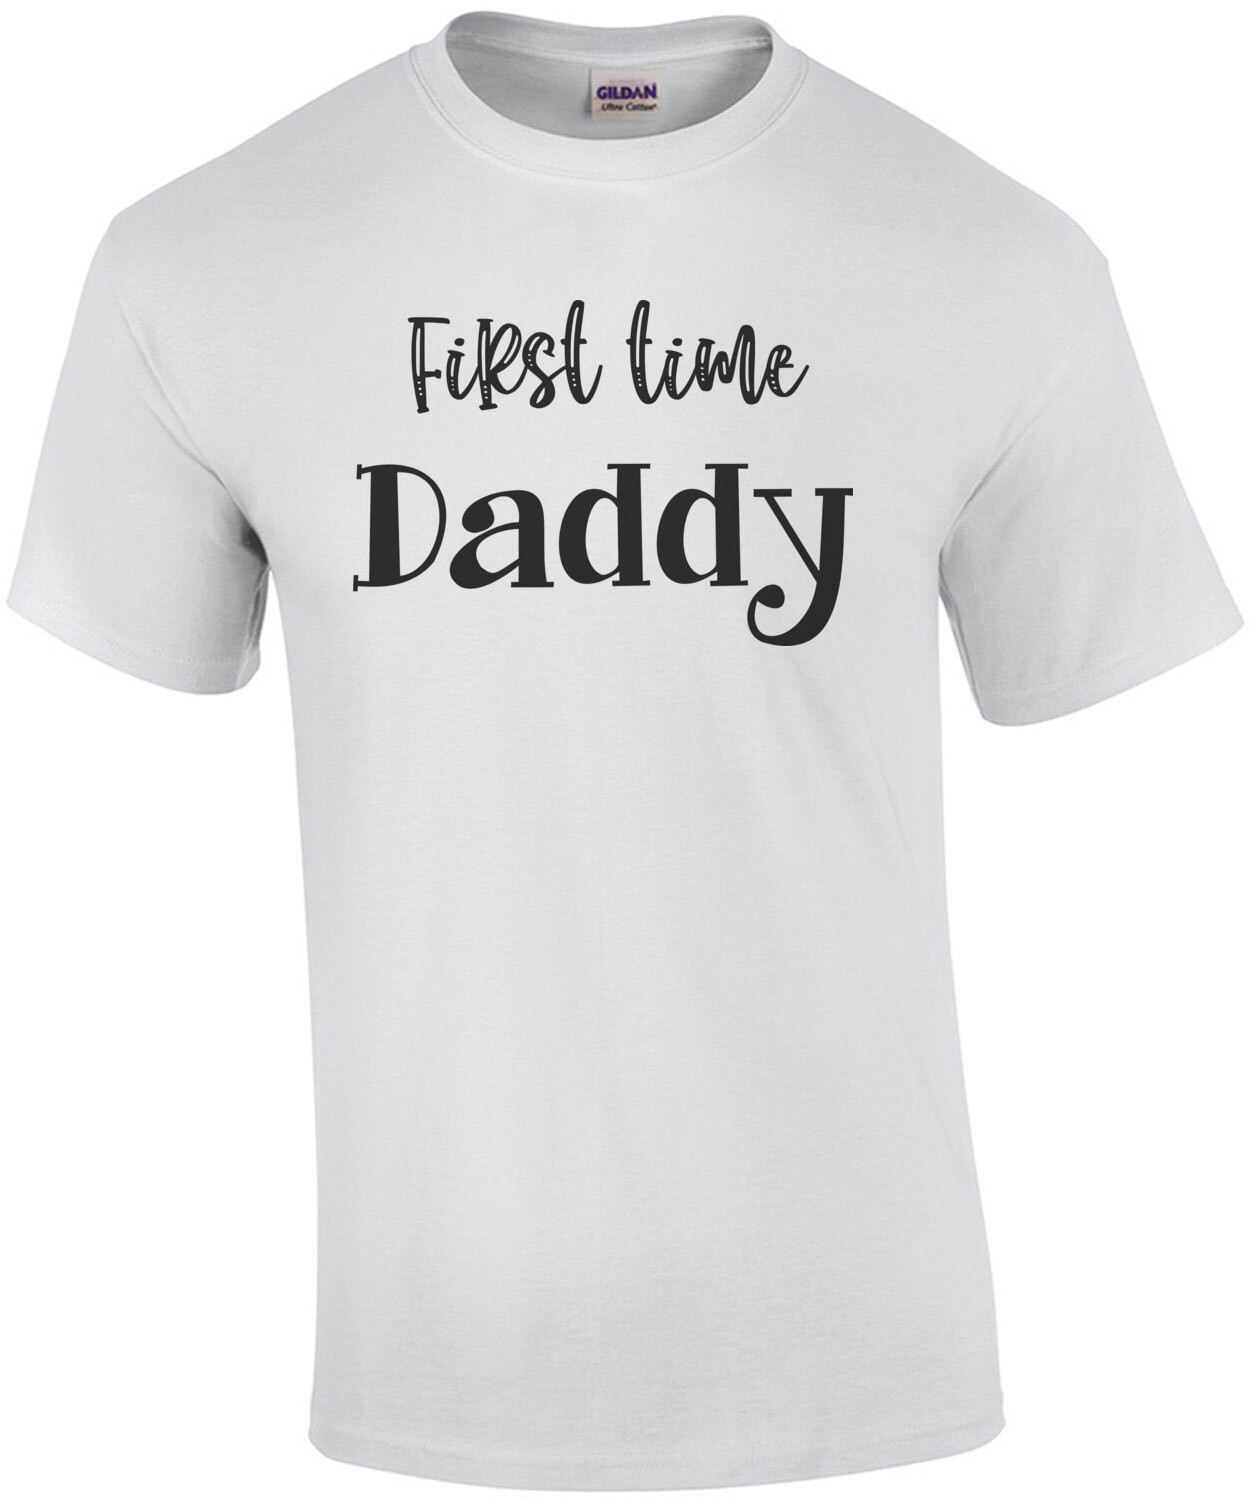 First time Daddy T-Shirt